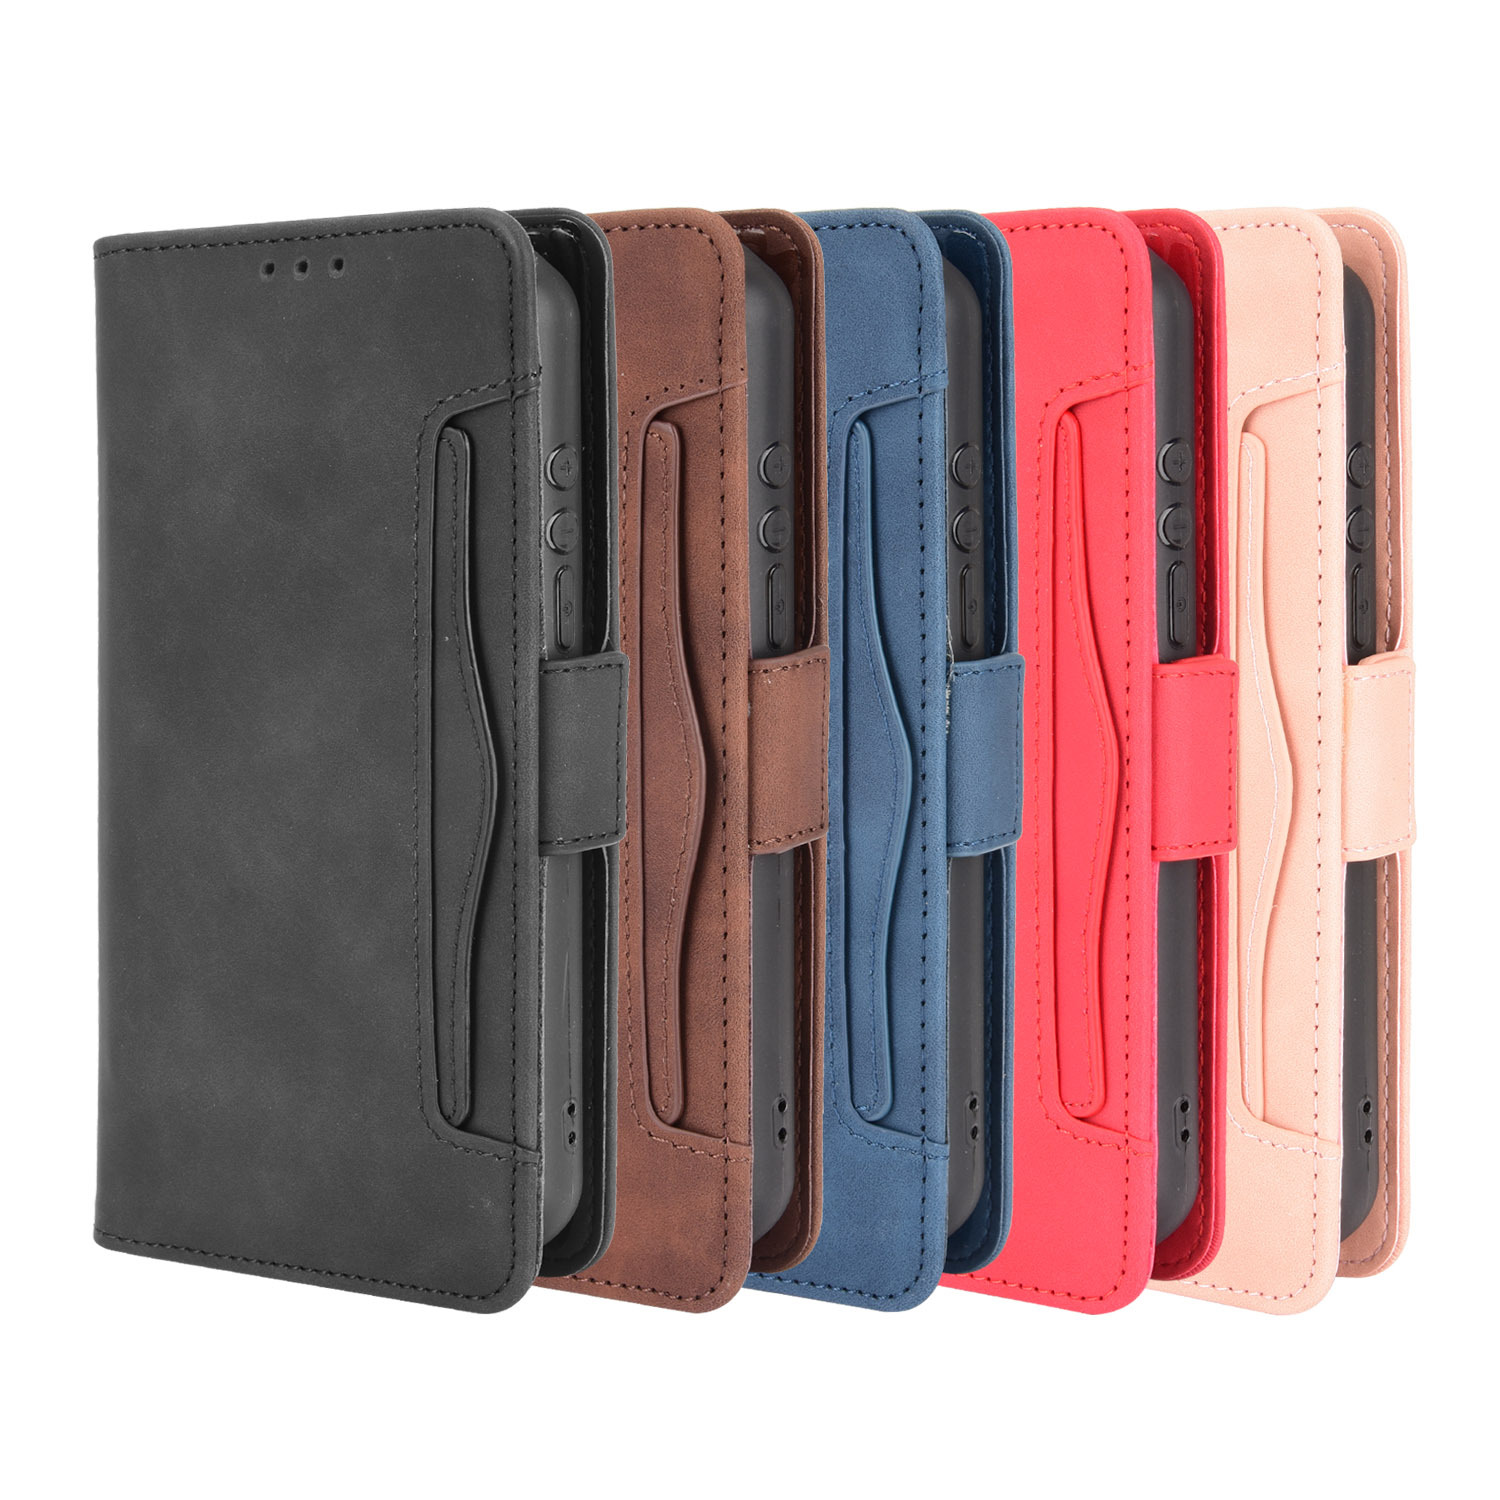 Bakeey-for-Ulefone-Armor-11-5G-Armor-11T-5G-Case-Magnetic-Flip-with-Multiple-Card-Slot-Wallet-Foldin-1915540-1